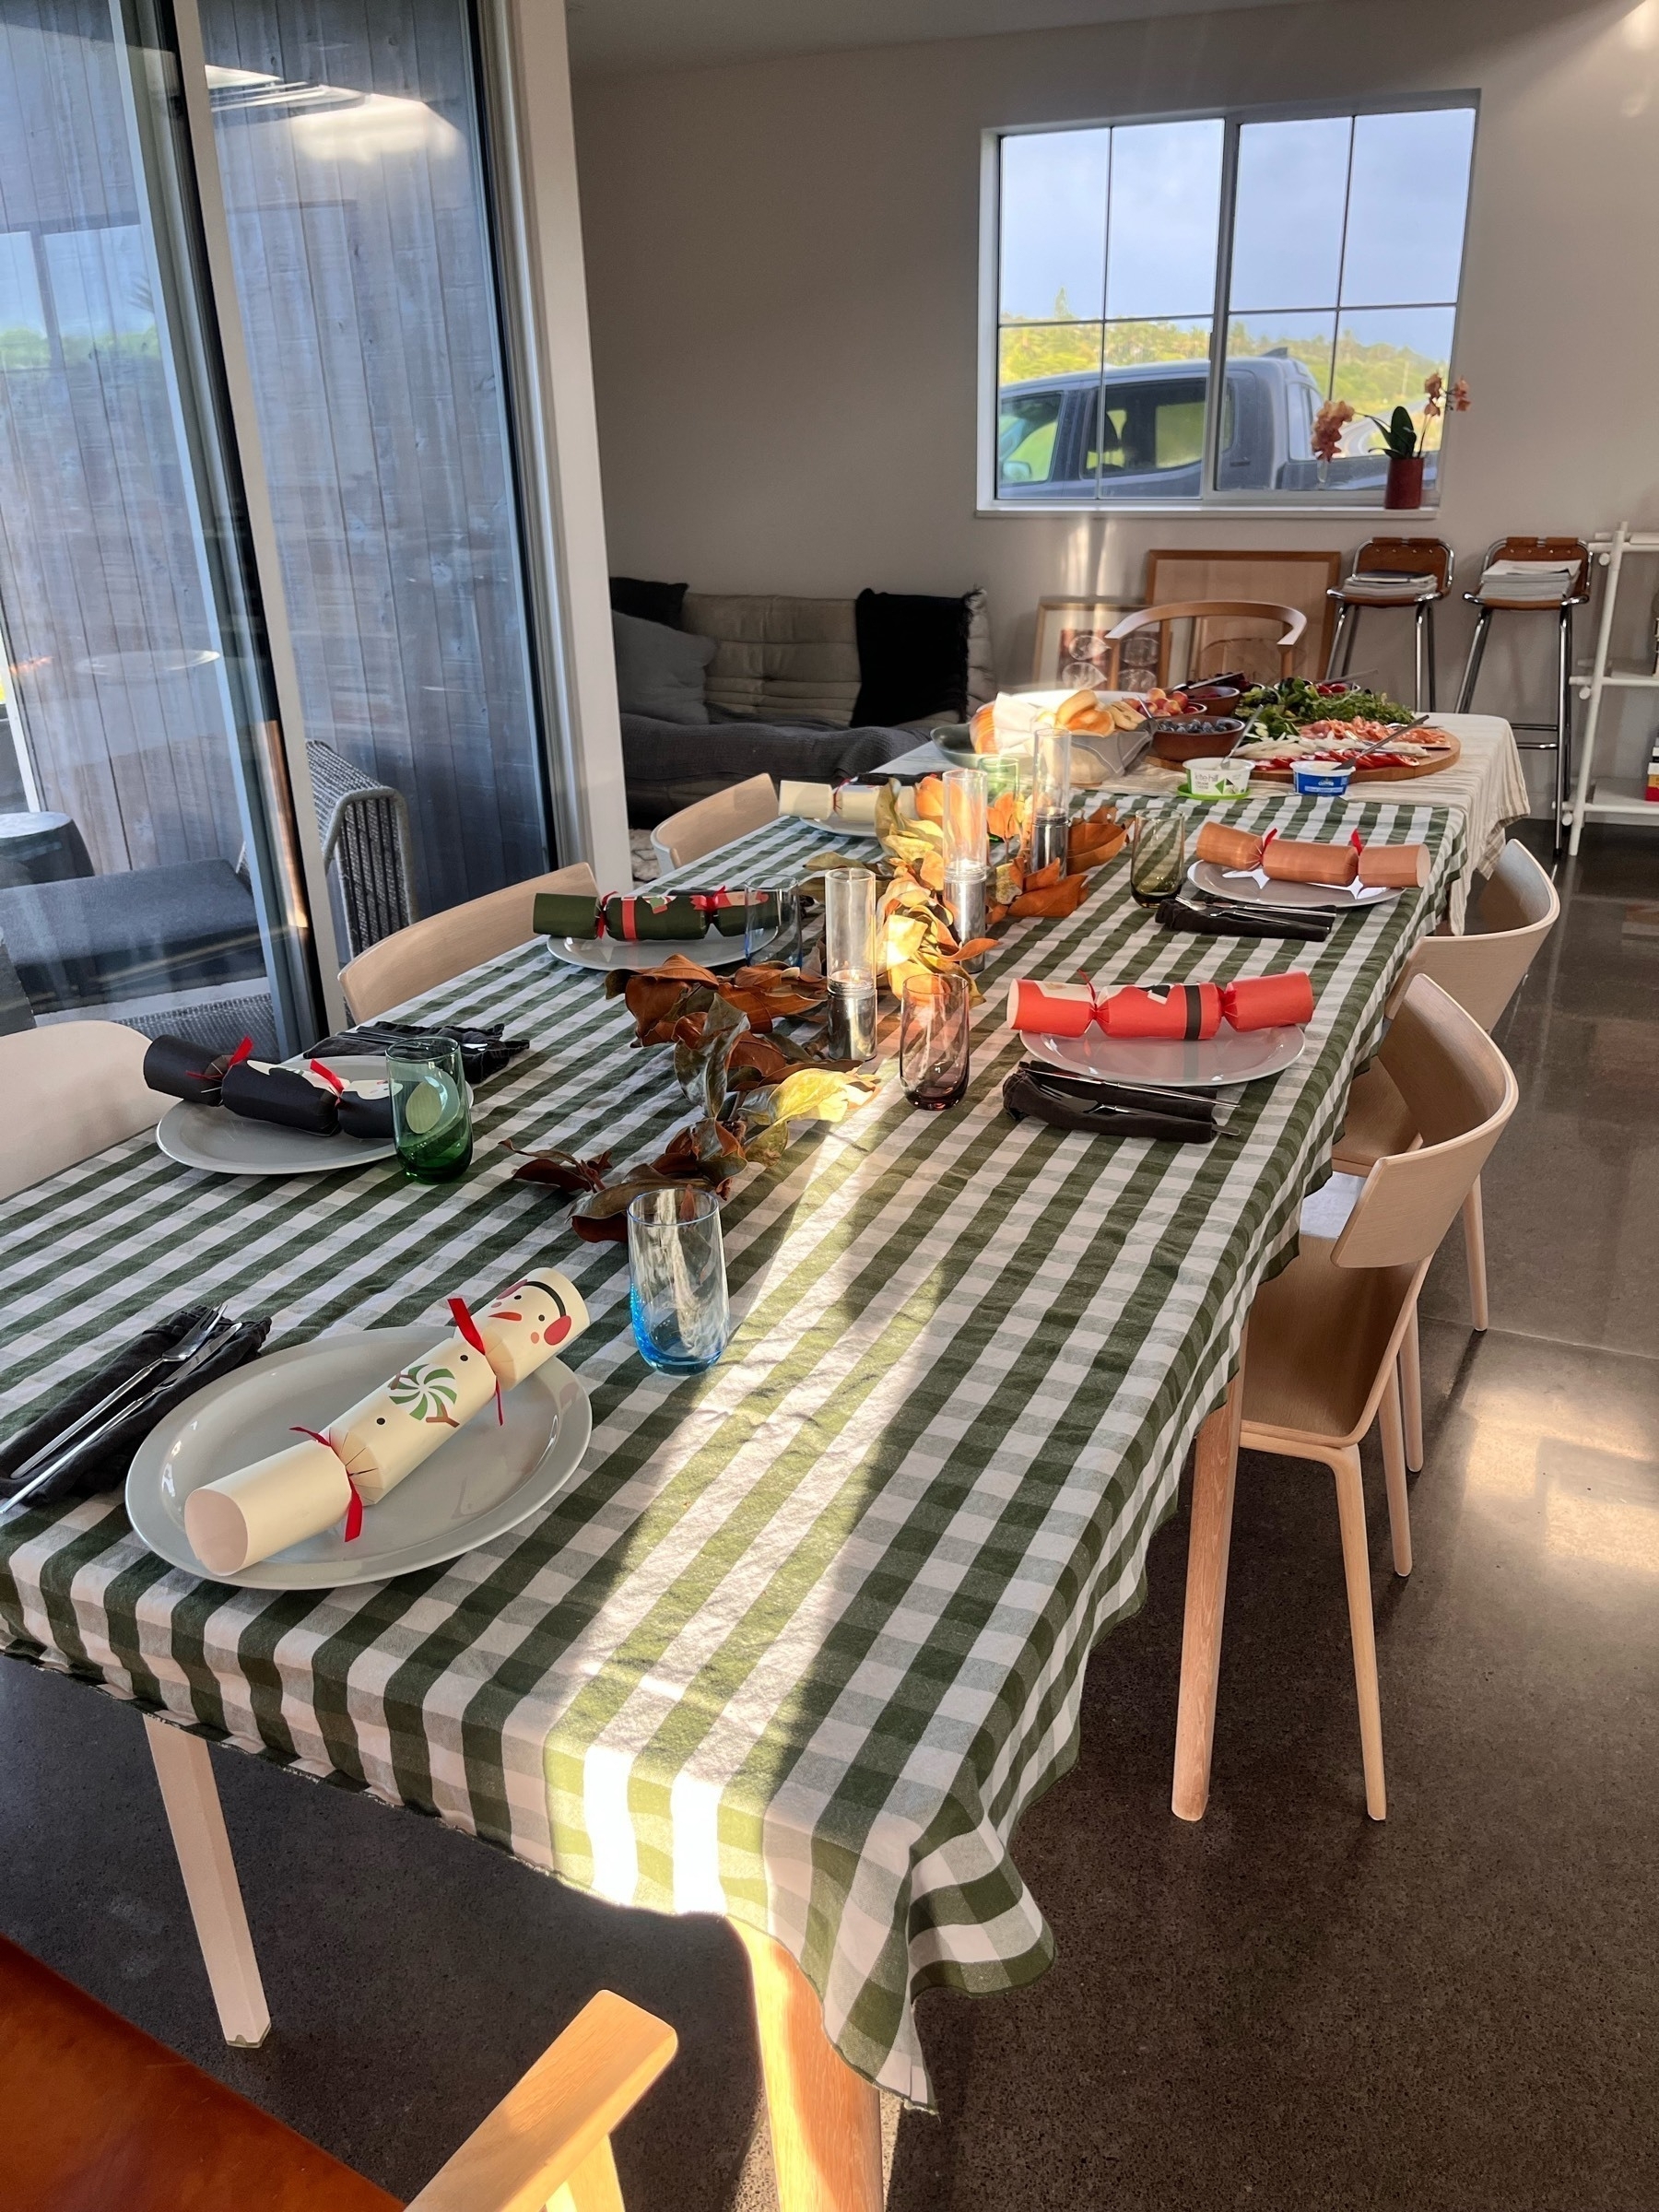 A table laid out for breakfast. In each plate is a Christmas cracker. At the far end of the table is the food, so people can help themselves buffet style. Sun light shines the length of the table